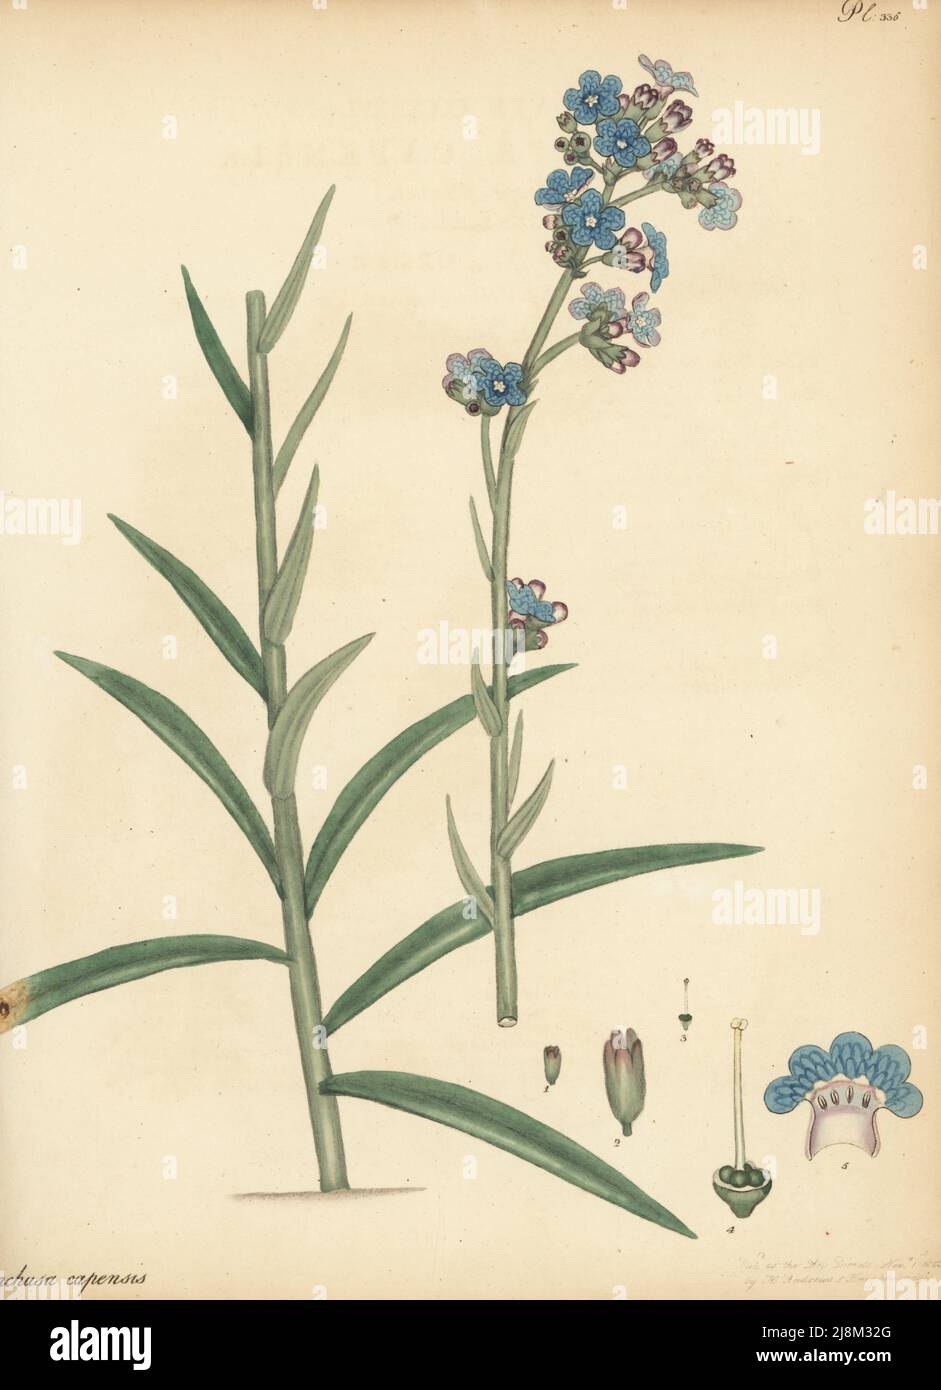 Cape forget-me-not or Cape alkanet, Anchusa capensis. From the Cape of Good Hope, South Africa, in the George Hibbert collection. Copperplate engraving drawn, engraved and hand-coloured by Henry Andrews from his Botanical Register, Volume 5, self-published in Knightsbridge, London, 1803. Stock Photo